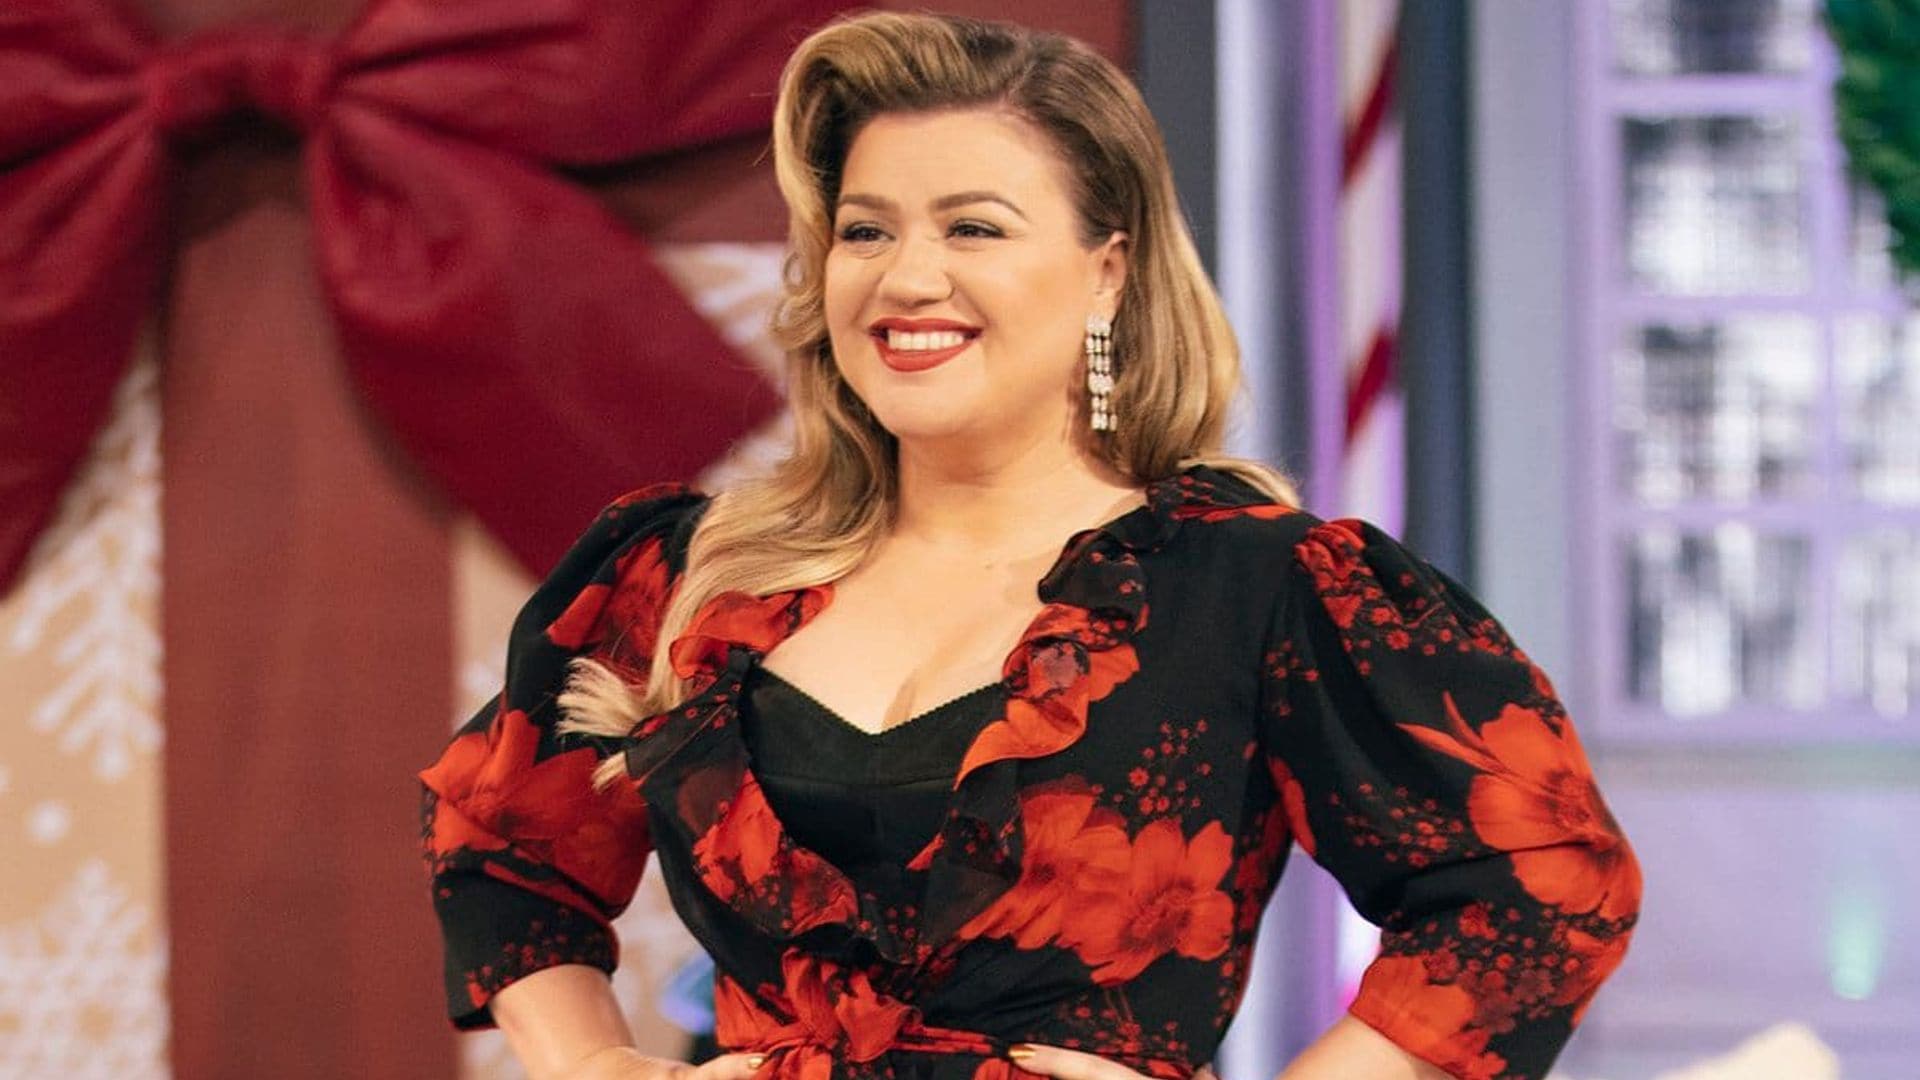 Is Kelly Clarkson ready to start dating again?